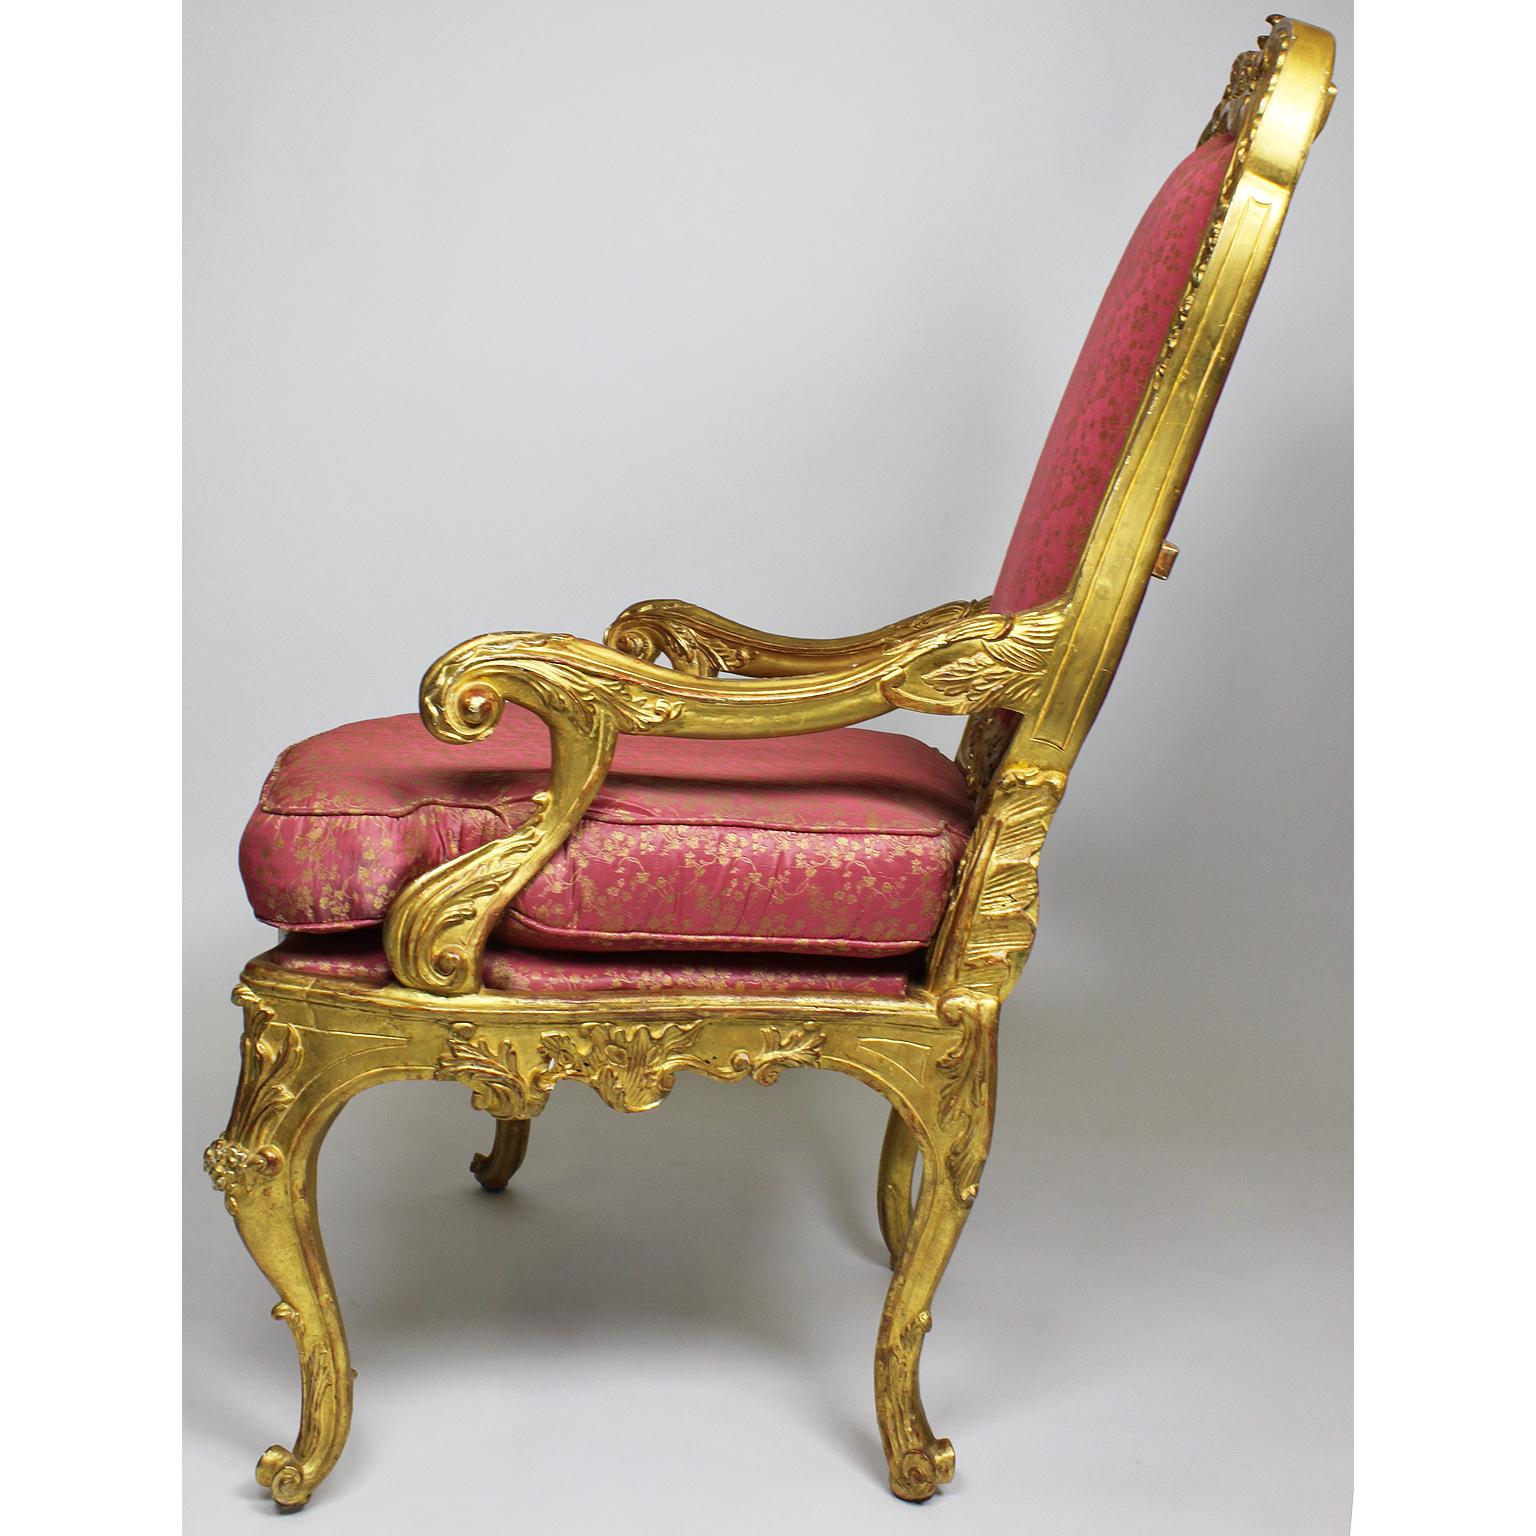 Pair of Italian Venetian Rococo Revival Style Giltwood Carved Throne Armchairs For Sale 6